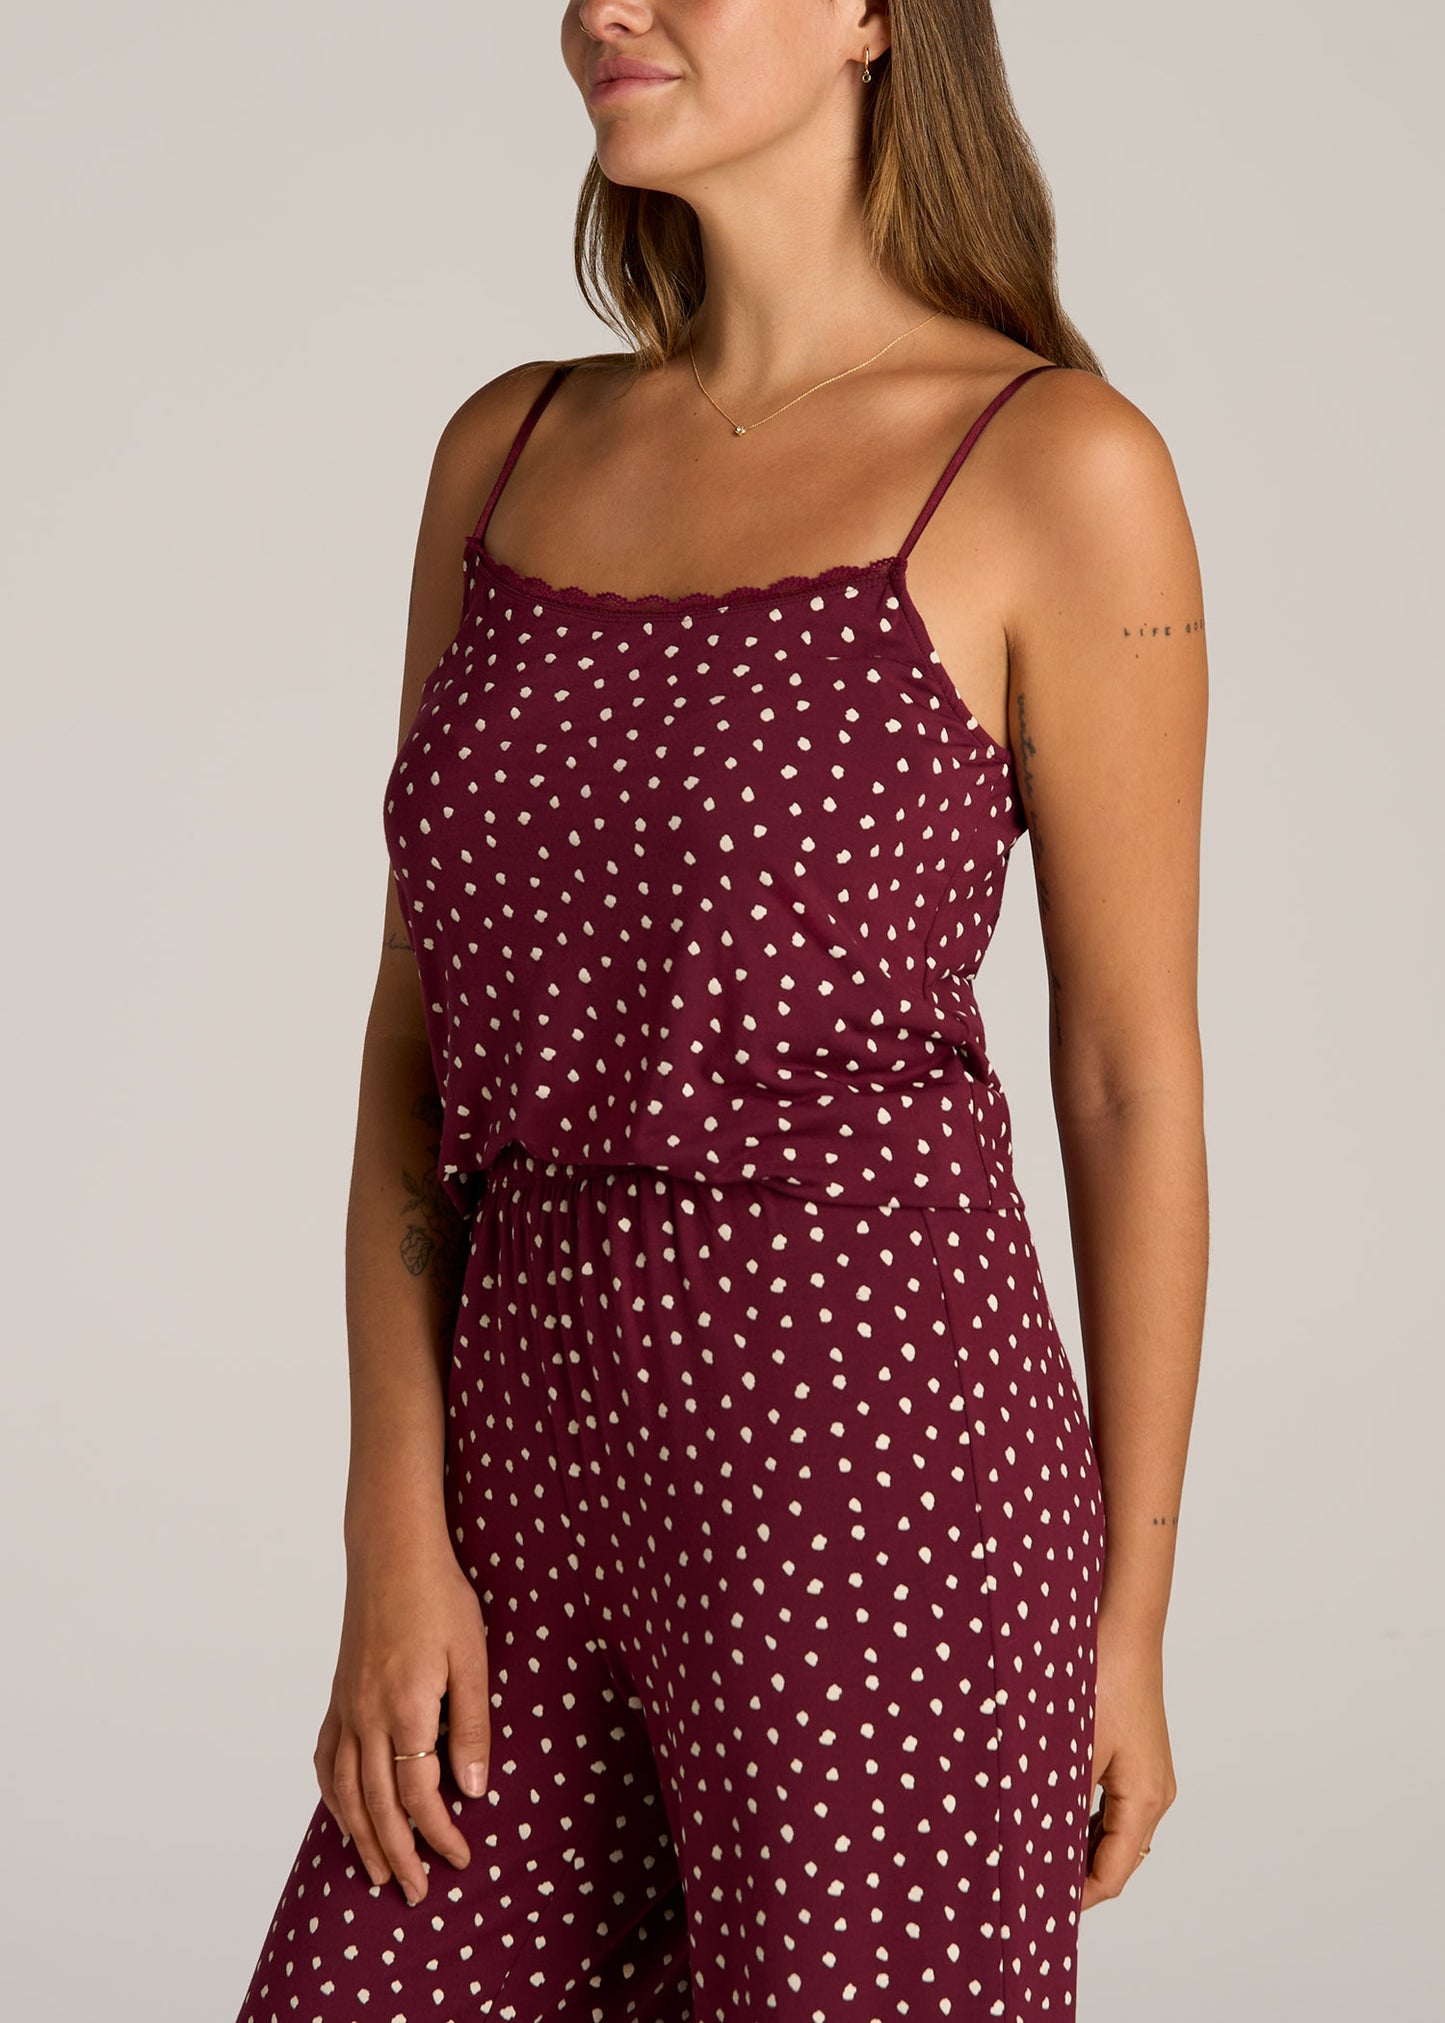 Lace Camisole Tank Top for Tall Women in Dark Cherry Cloud Print